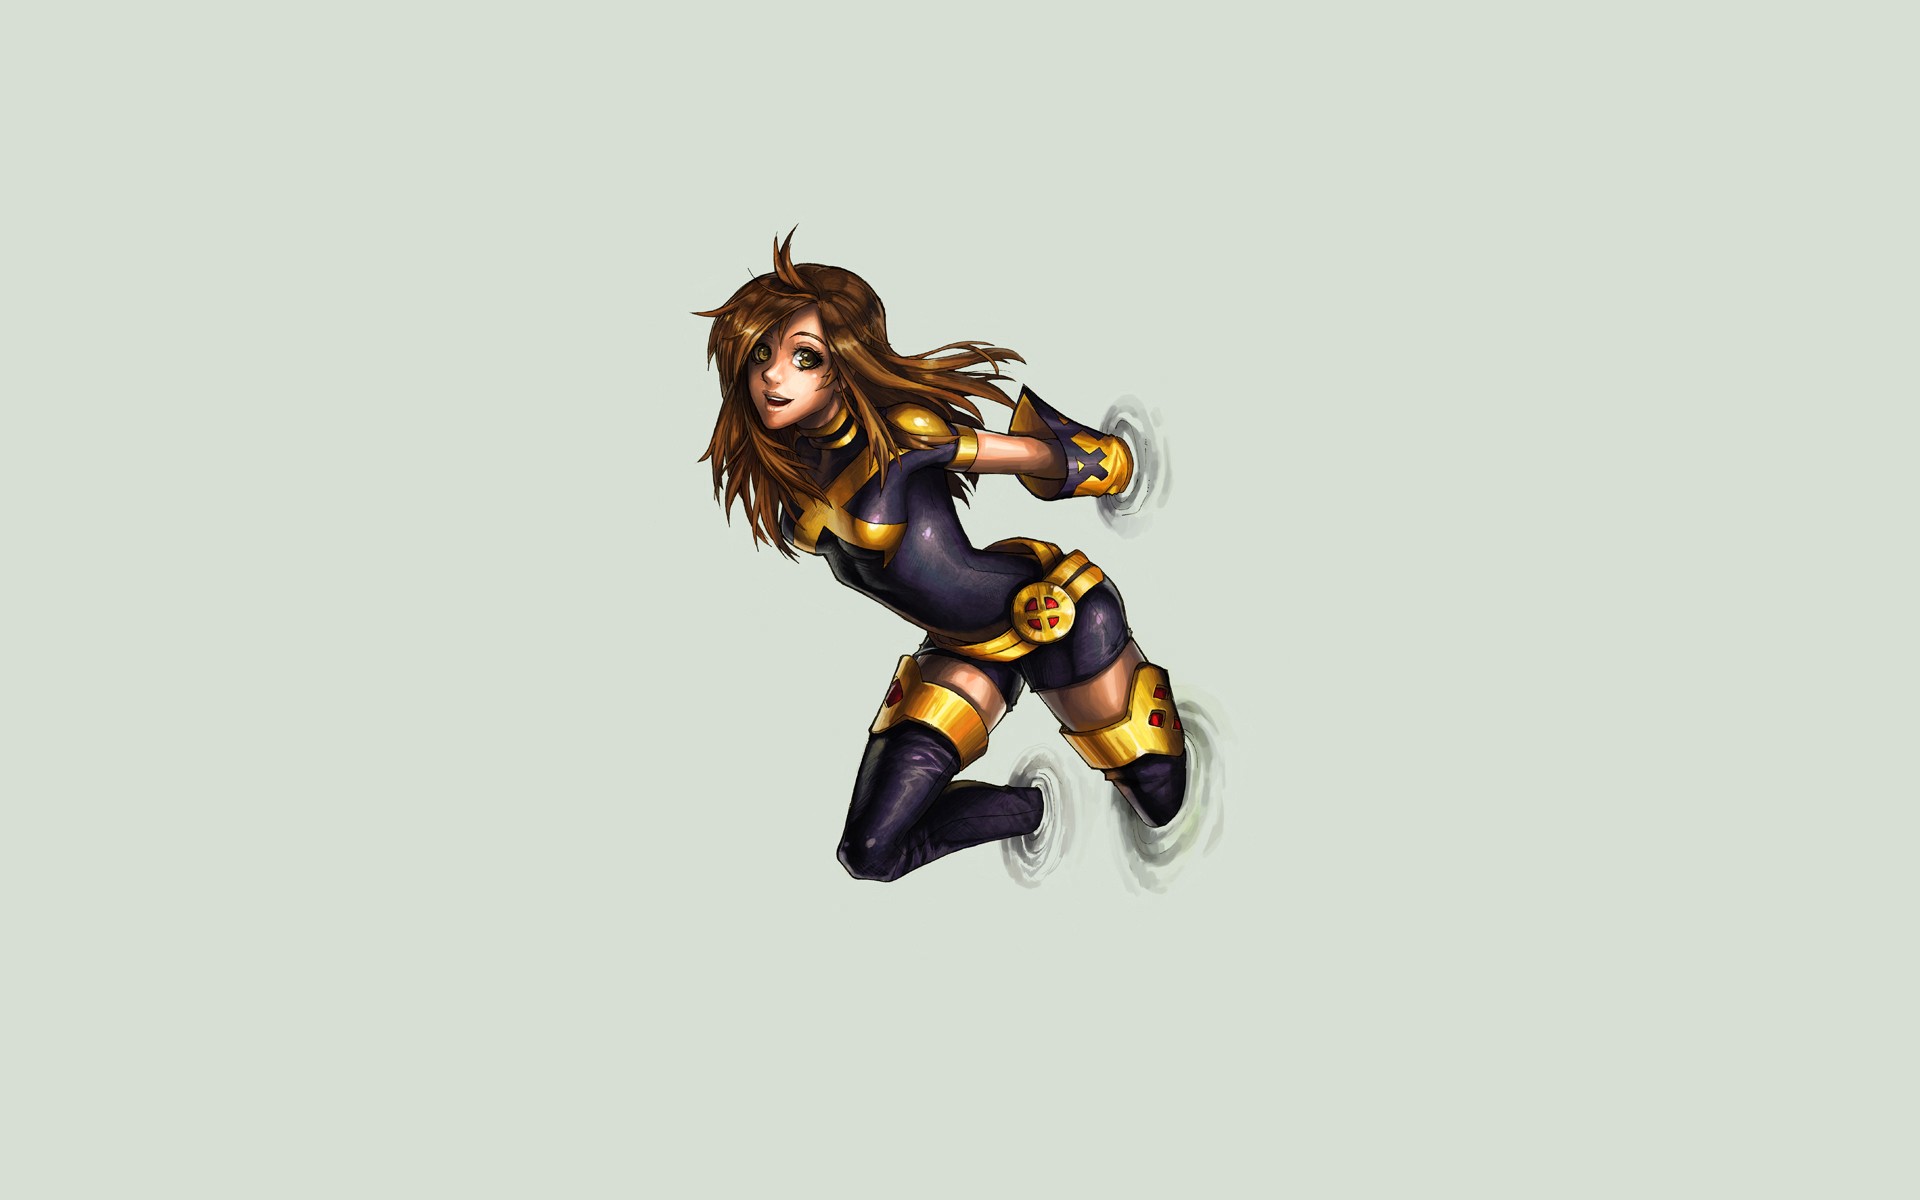 Kitty Pryde Marvel Comics Brown Hair Long Hair Glove Boots Thigh Boots Belt Yellow Eyes Girl Smile 1920x1200